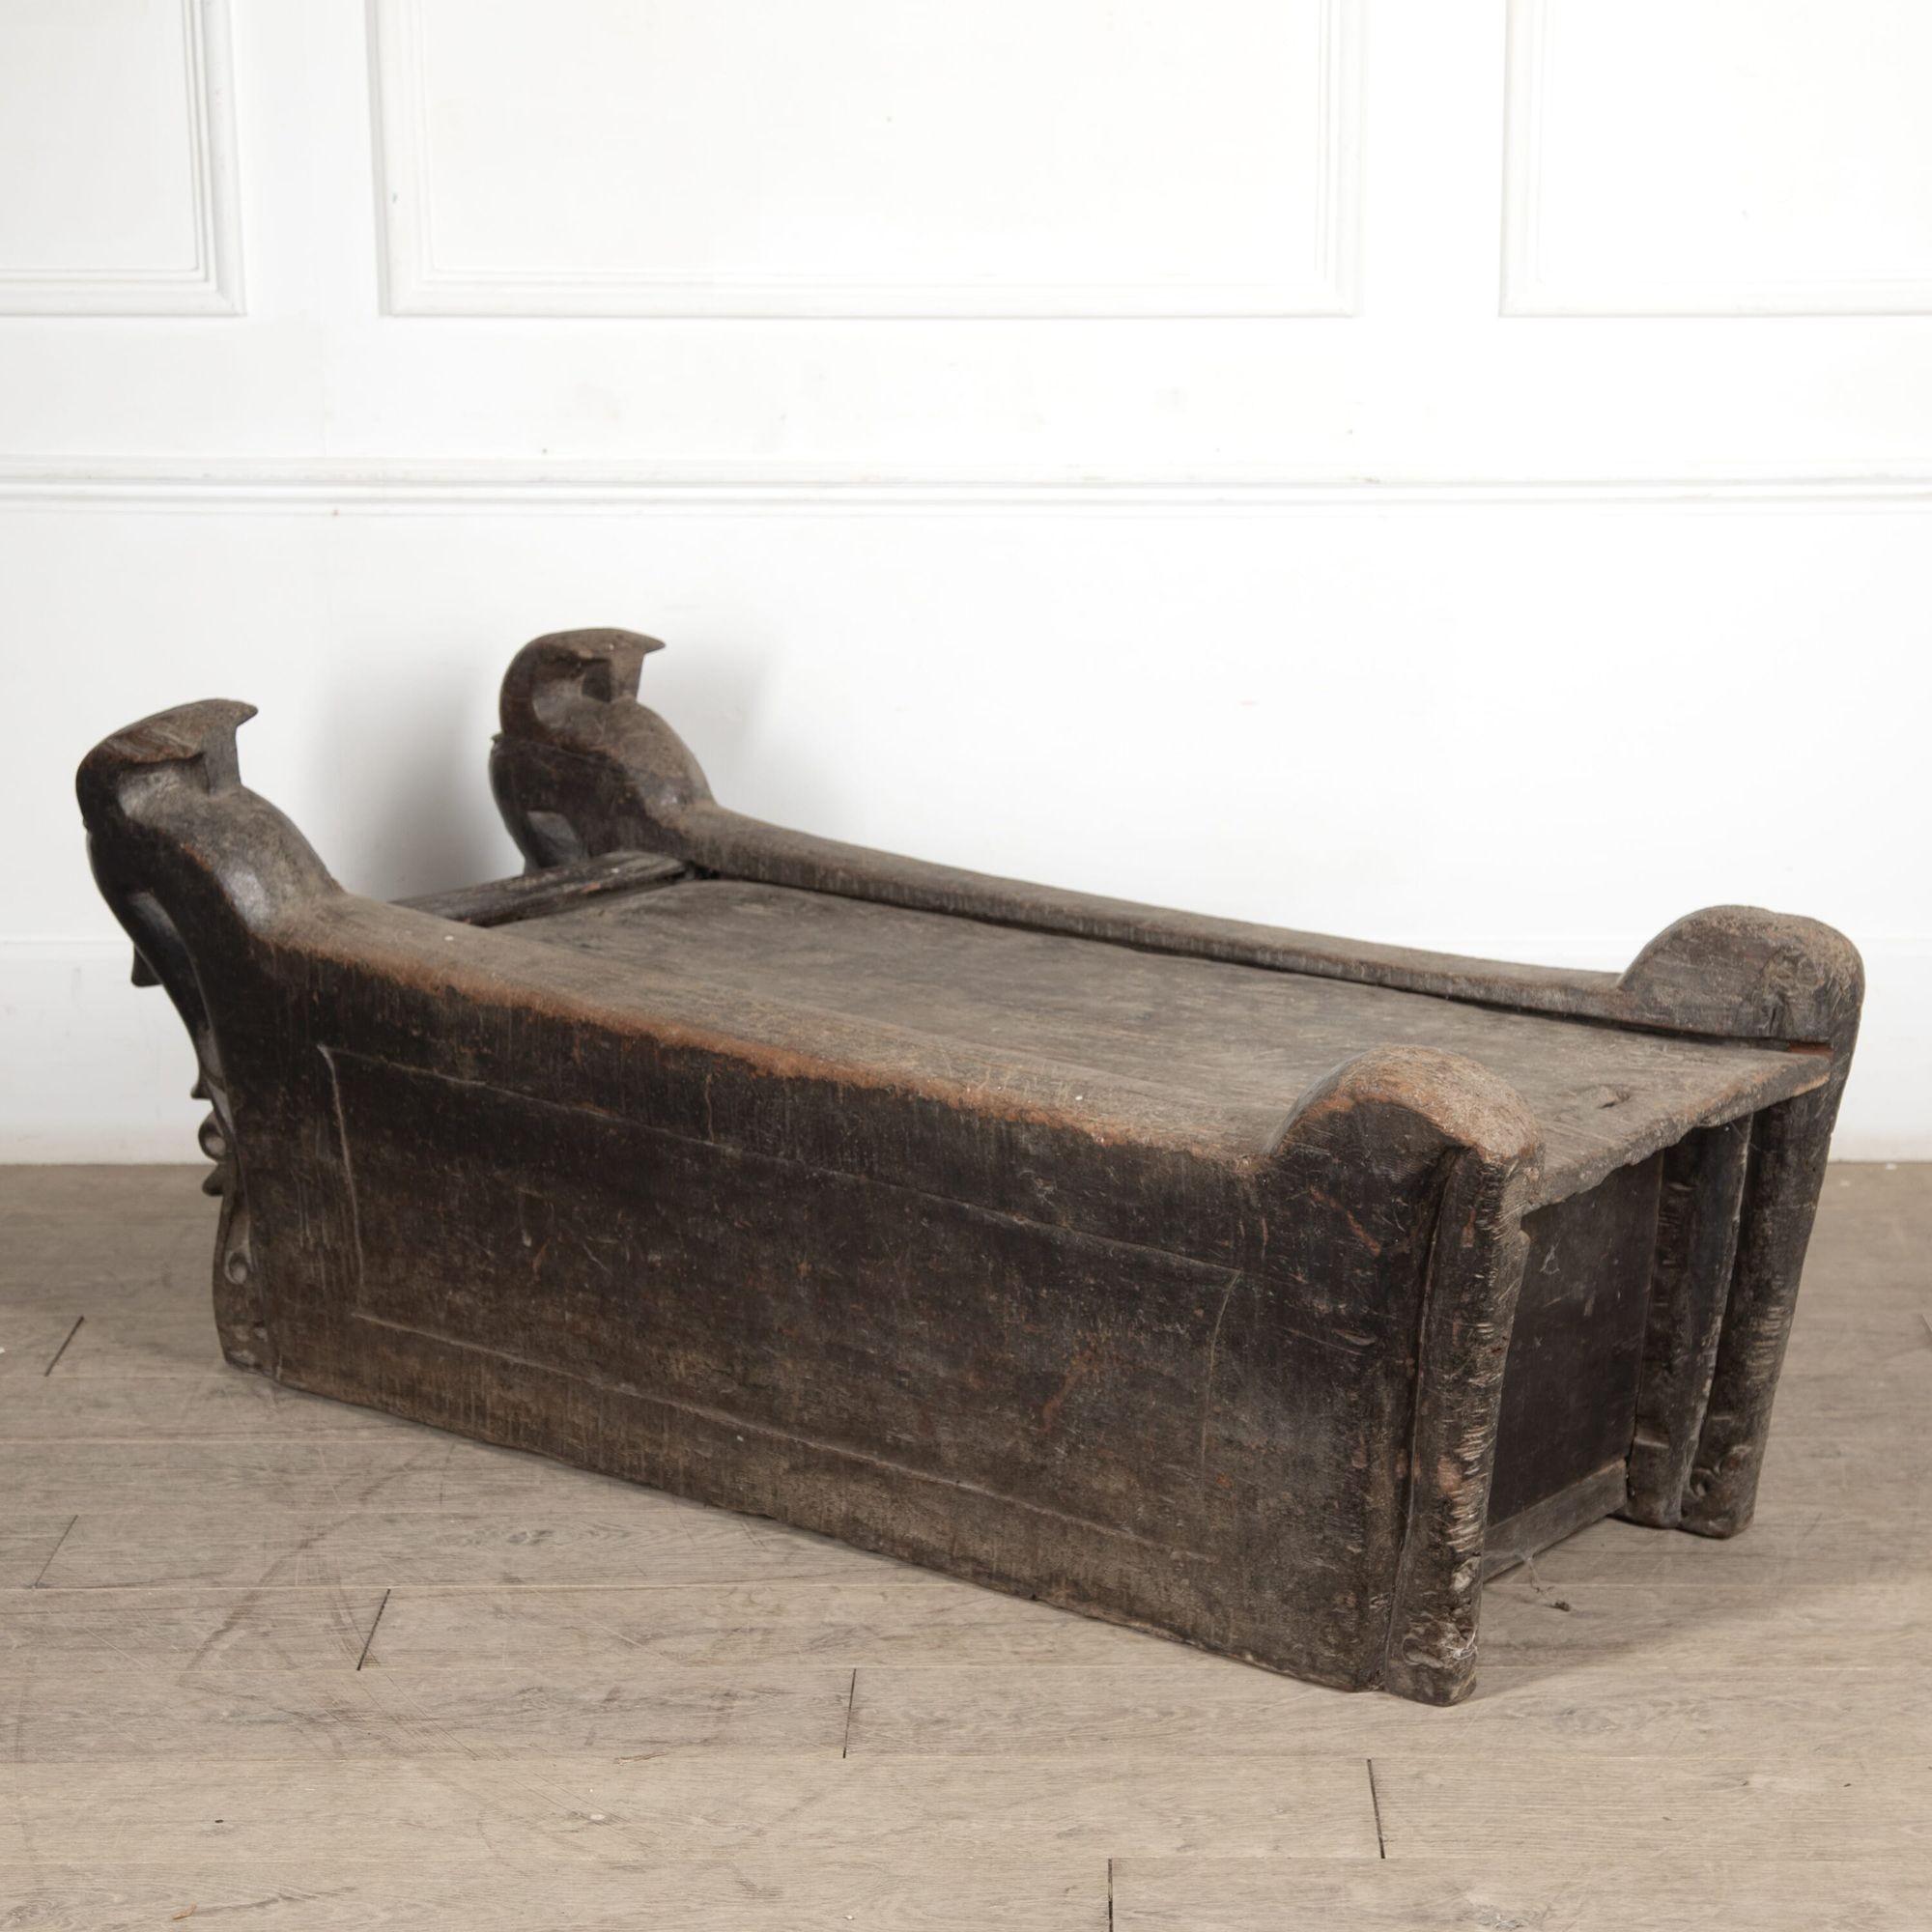 Late 19th century Indonesian Batak Toba domestic chest/child's bed.
With a sliding top and stylised head corner with Singa creature pillars, found in Noble houses.
Dating to the latter part of the 19th century to the early 20th century.
A similar